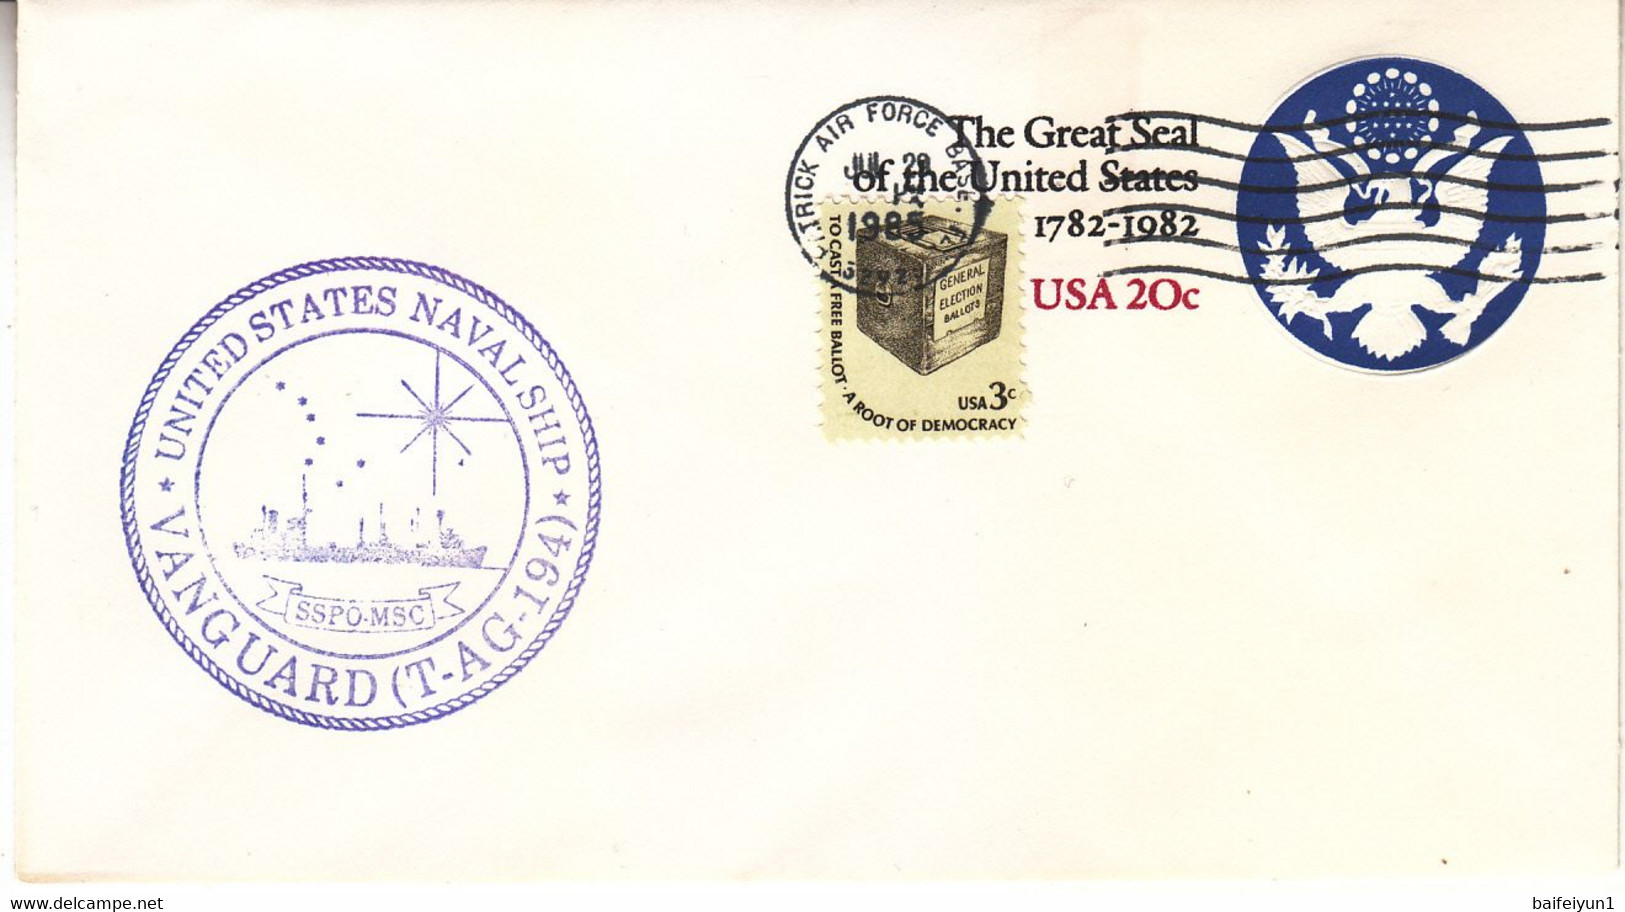 1985 USA  Space Shuttle Challenger STS-51F Mission And VANGUARD Naval Ship Commemorative Cover - North  America